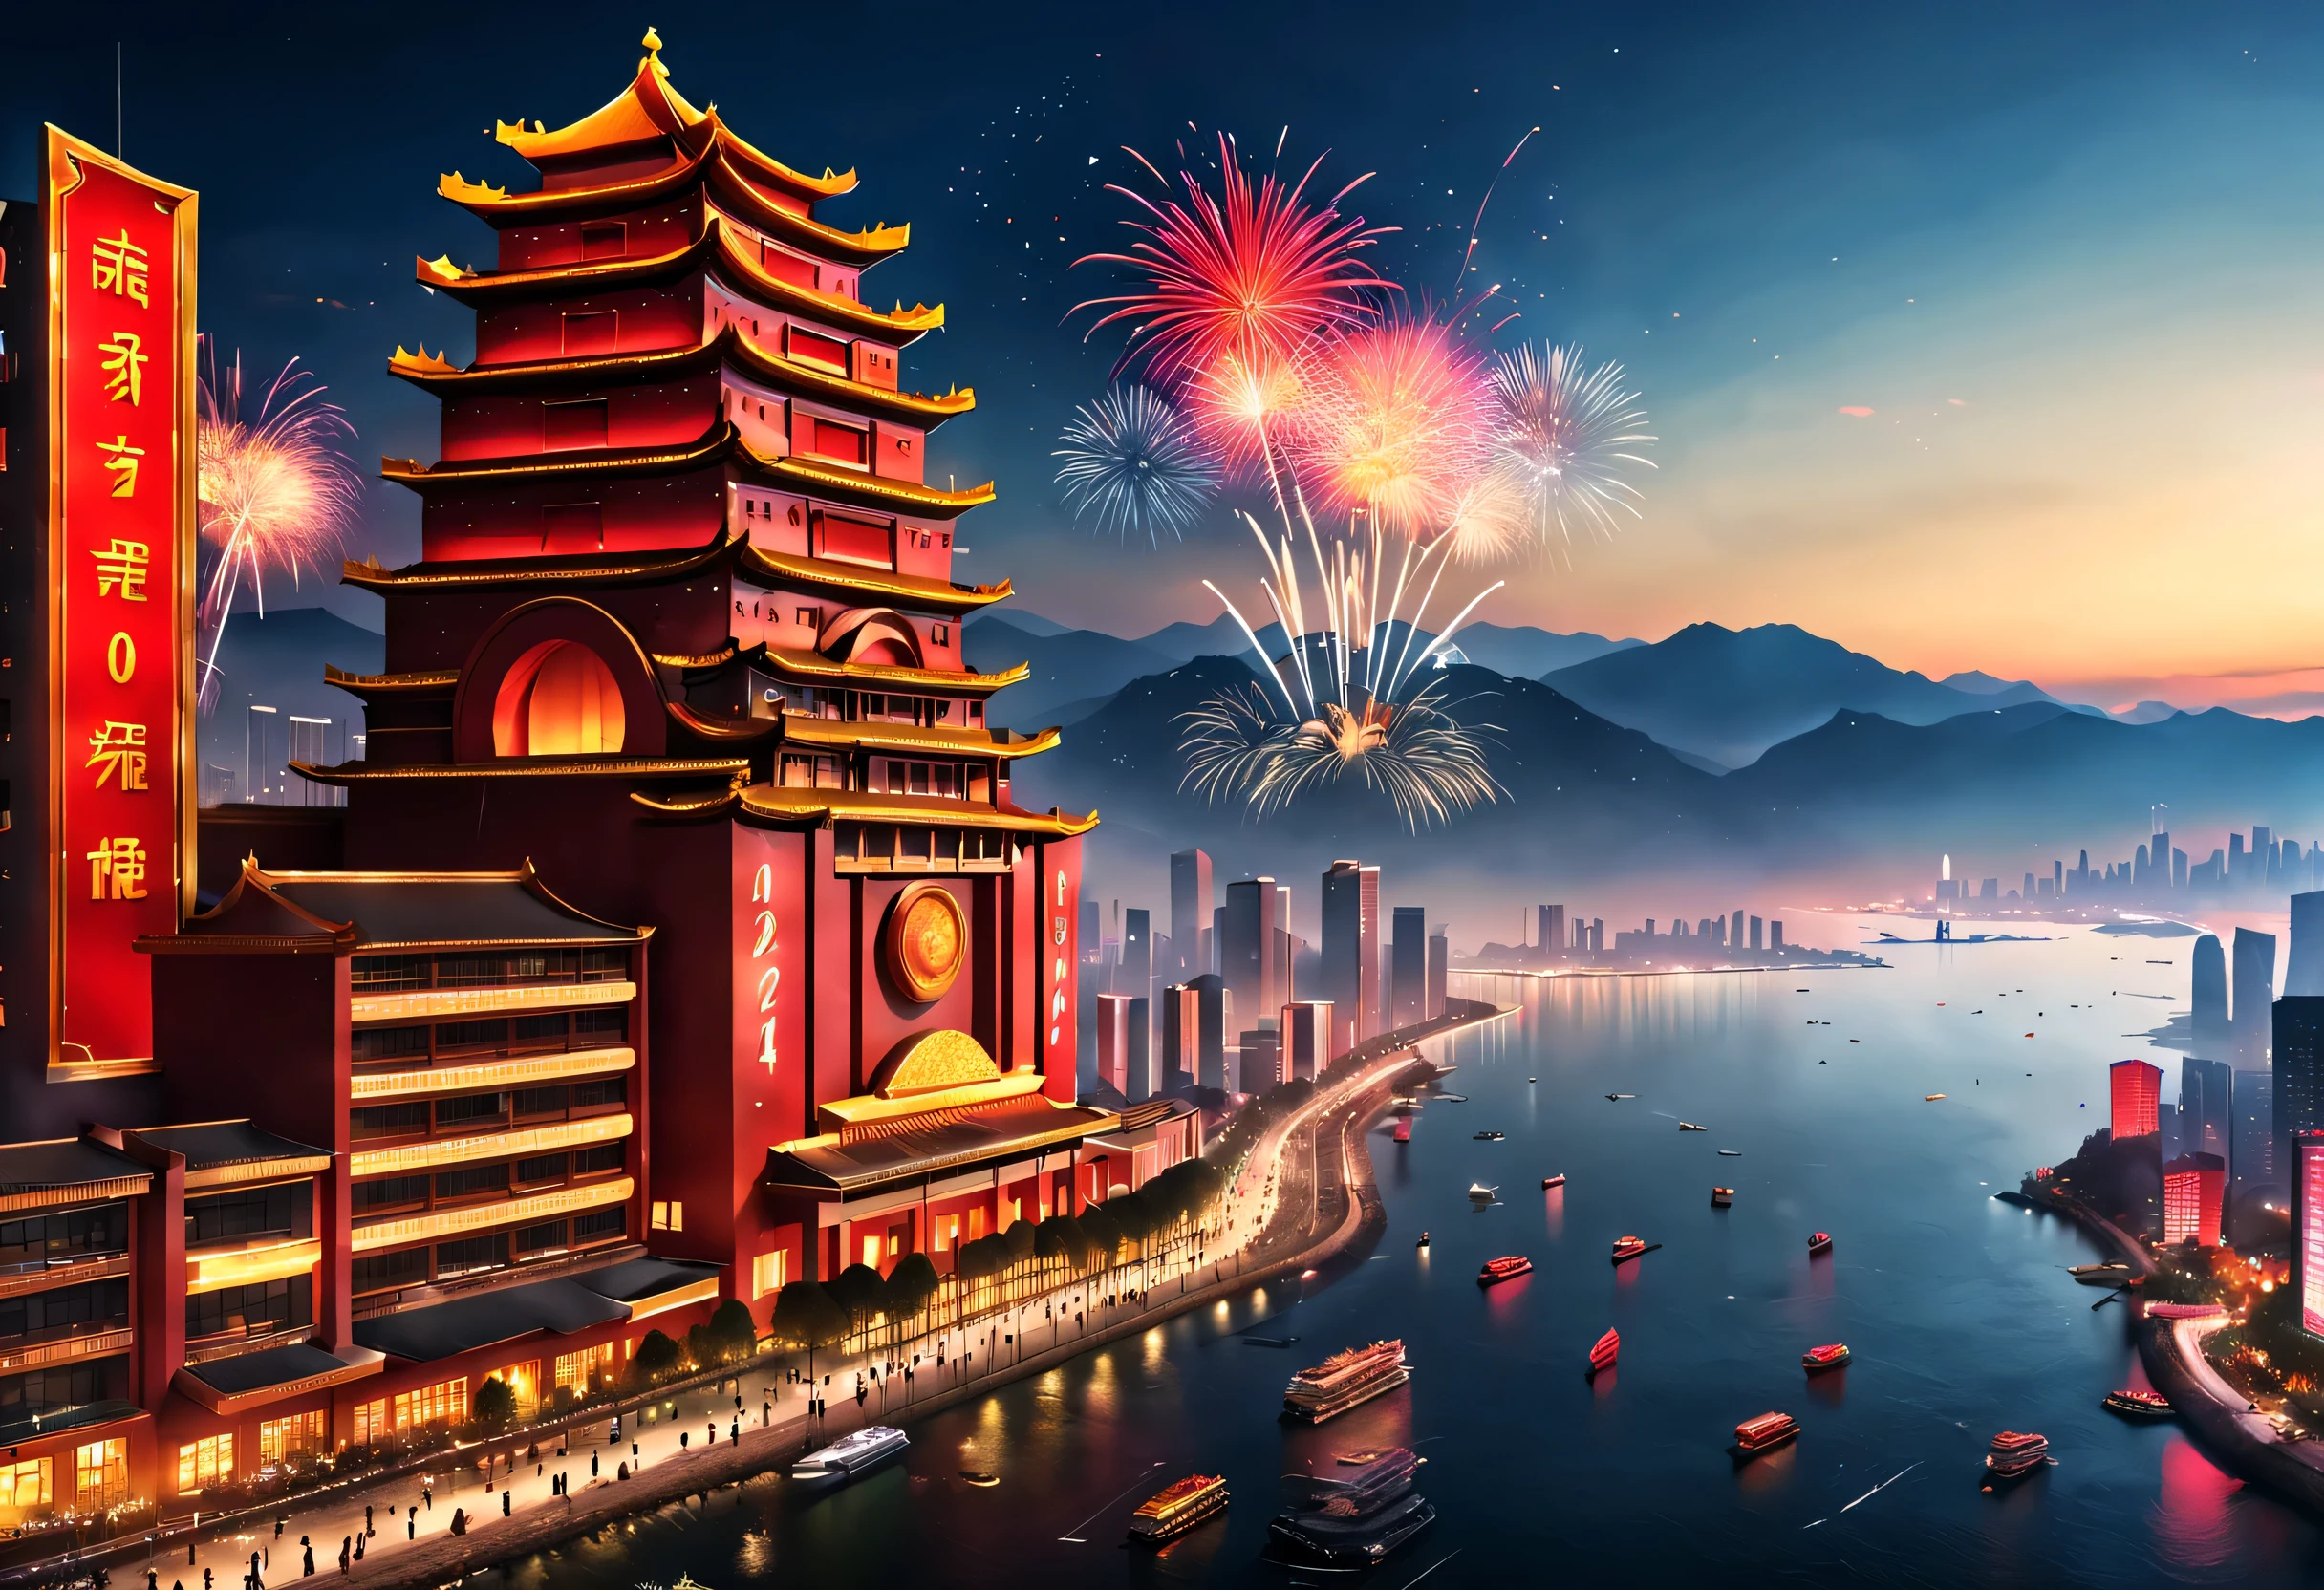 (2024 New Year’s Eve celebration scene design), (Red and gold poster design), (Qingdao seaside giant building complex thousands of miles away, Chinese big breasts: 1.2), Projection screen, (a happy new year: 1.3), Crowd watching countdown on big screen, Fireworks blooming all over the sky, Many ribbons and colorful pieces fall in the sky, people&#39;s wishes, Background with: Heavy snow cover,